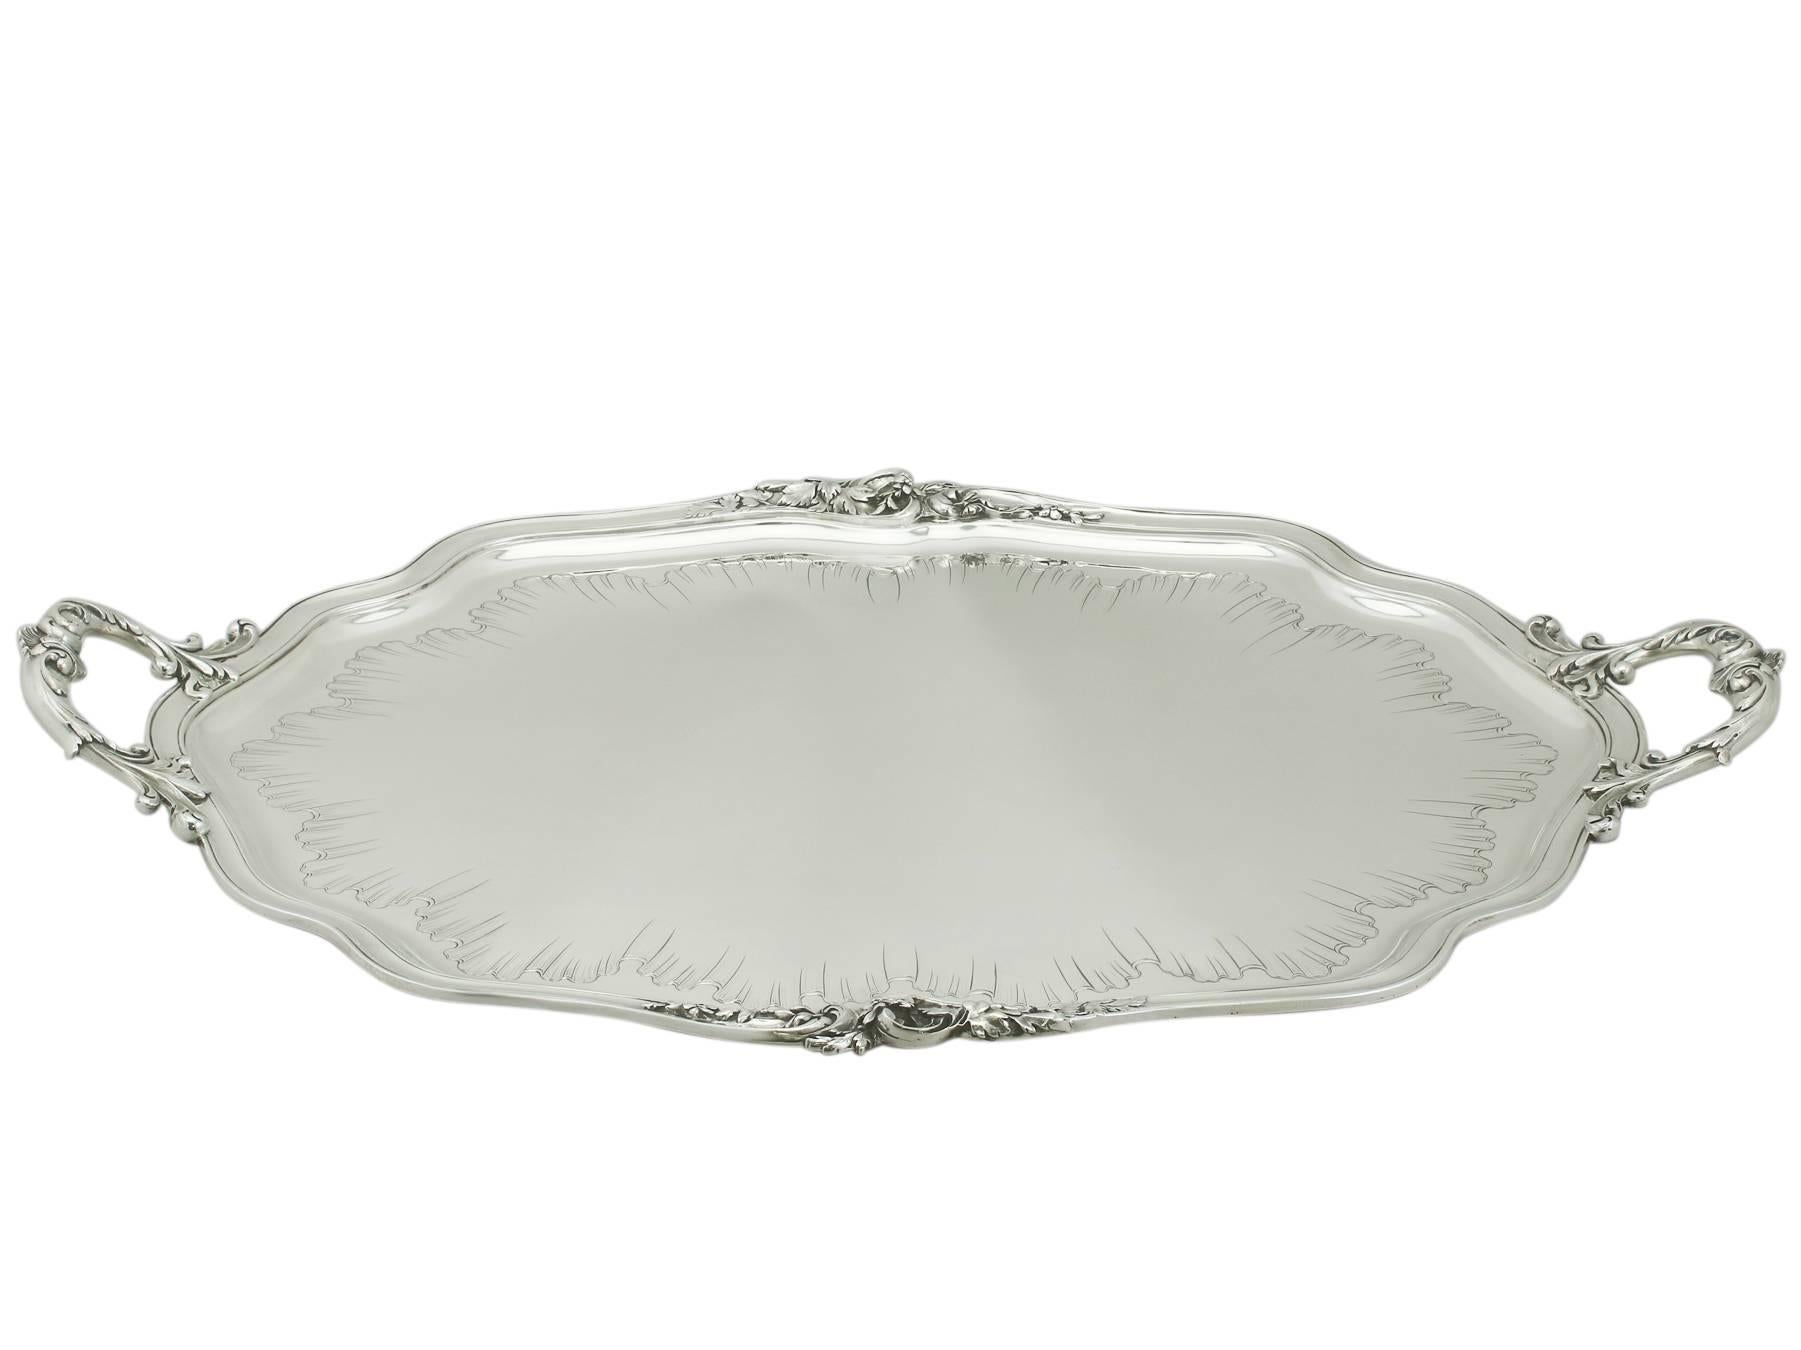 An exceptional, fine and impressive antique French sterling silver drinks/tea tray; an addition to our silver tea ware collection.

This exceptional antique French sterling silver tray has an oval, serpentine shaped form.

The surface of this large